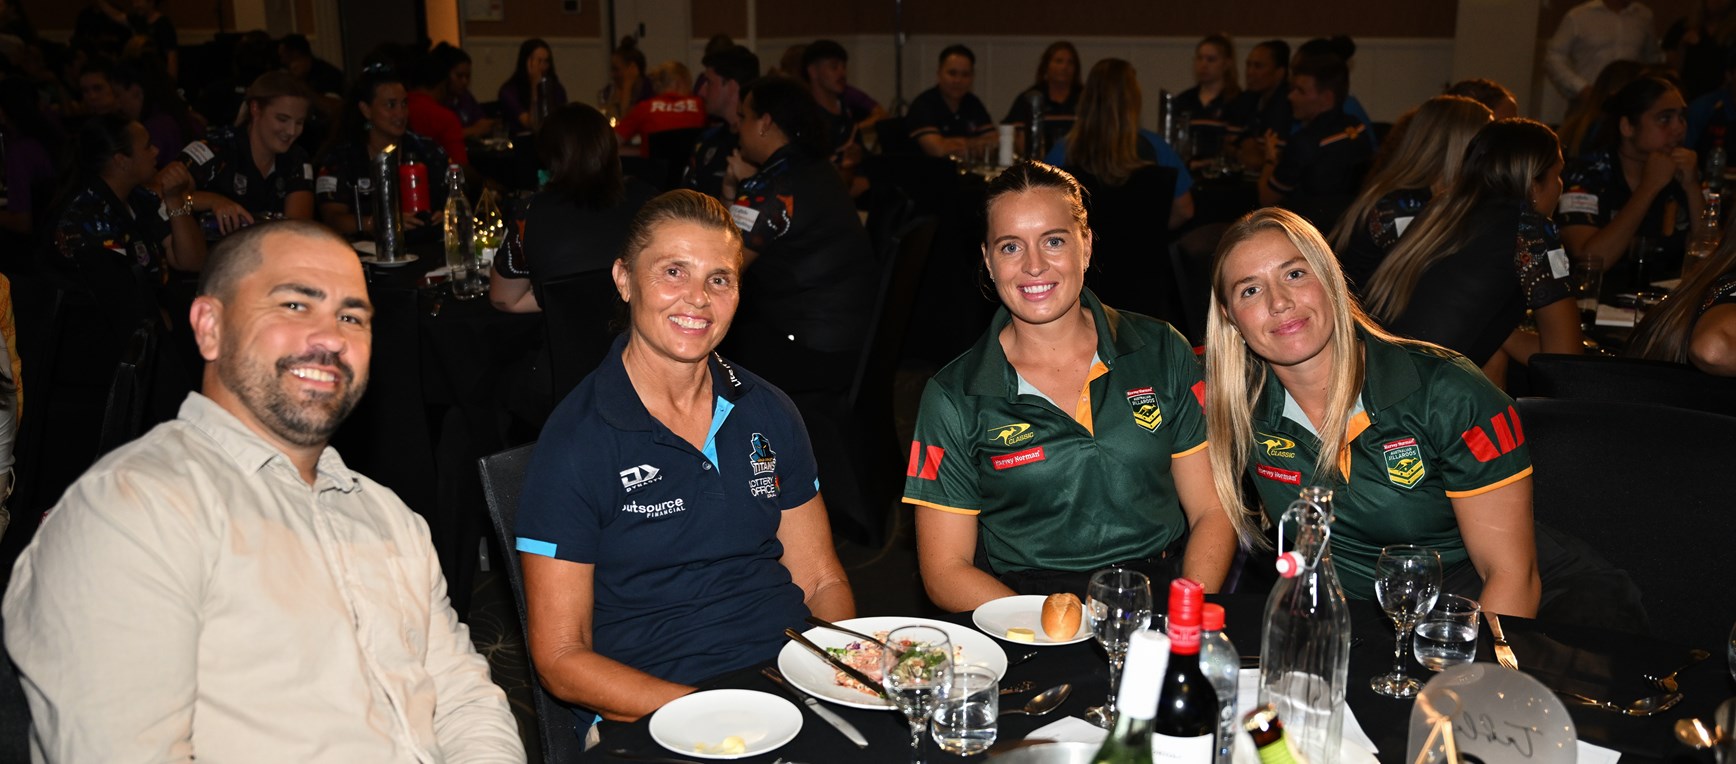 In pictures: Women's National Championships tournament welcome dinner